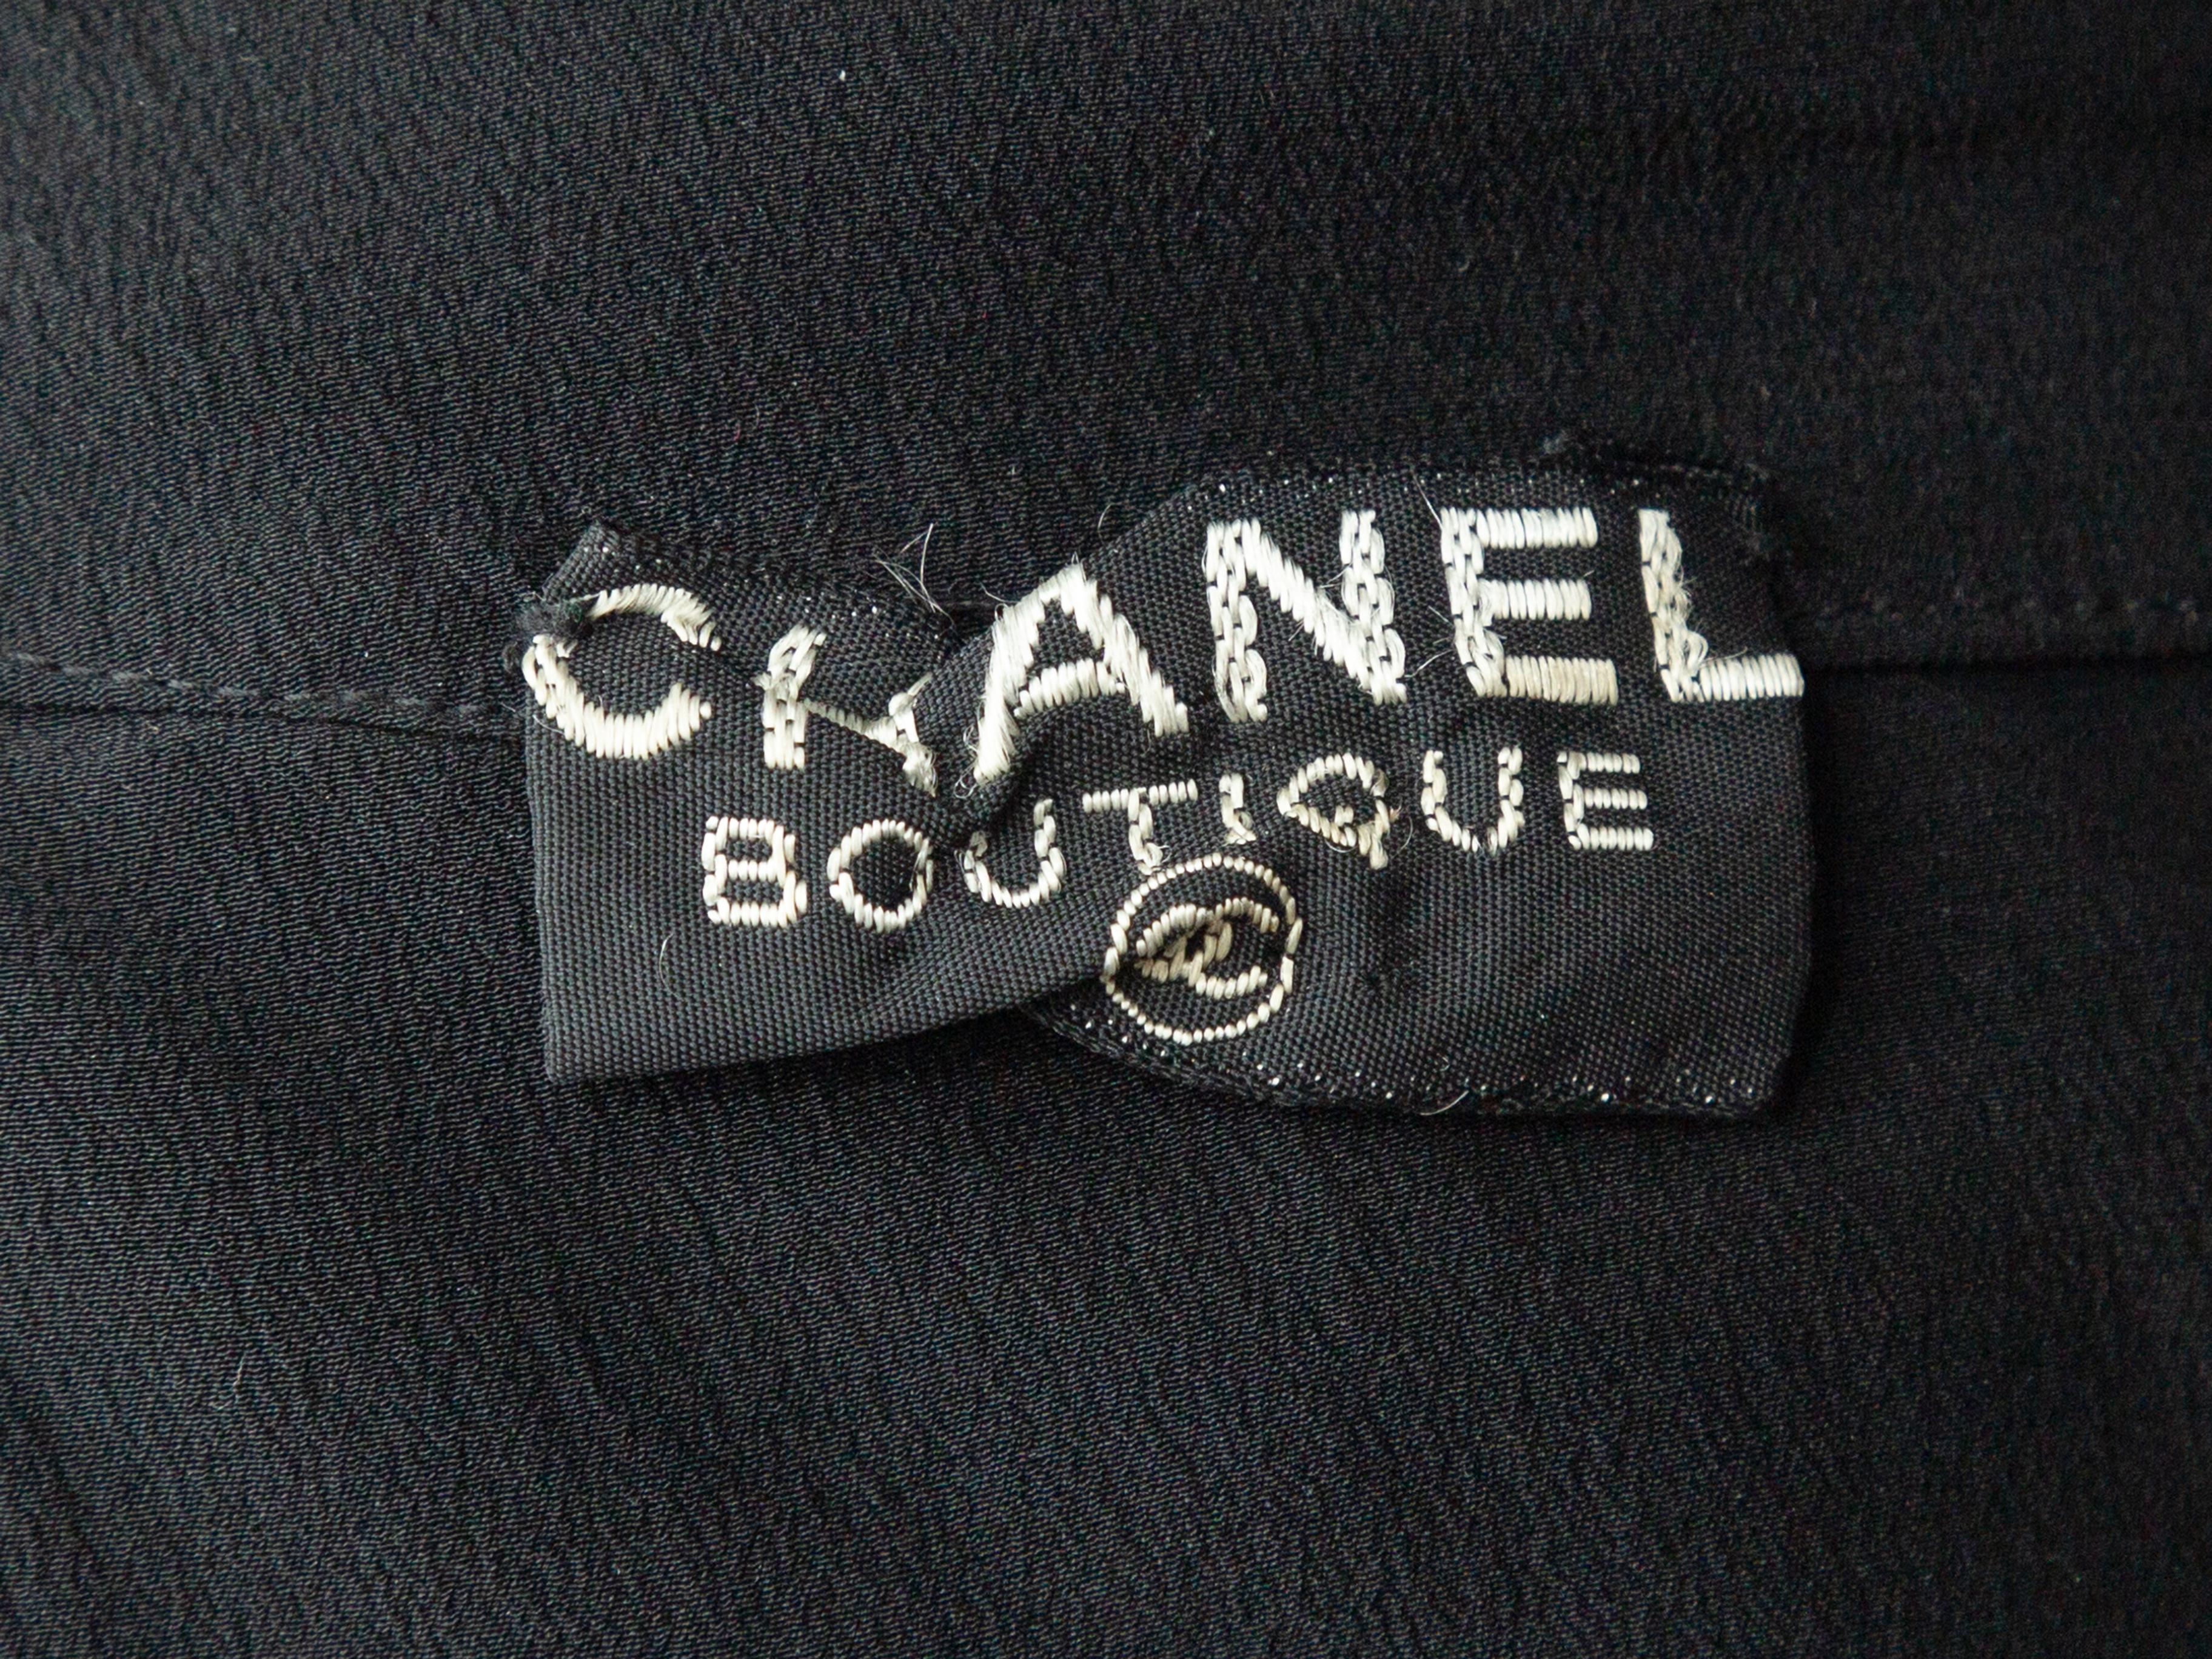 Product details: Vintage black sleeveless pleated top by Chanel Boutique. Round neckline. Button closures at center back. 30